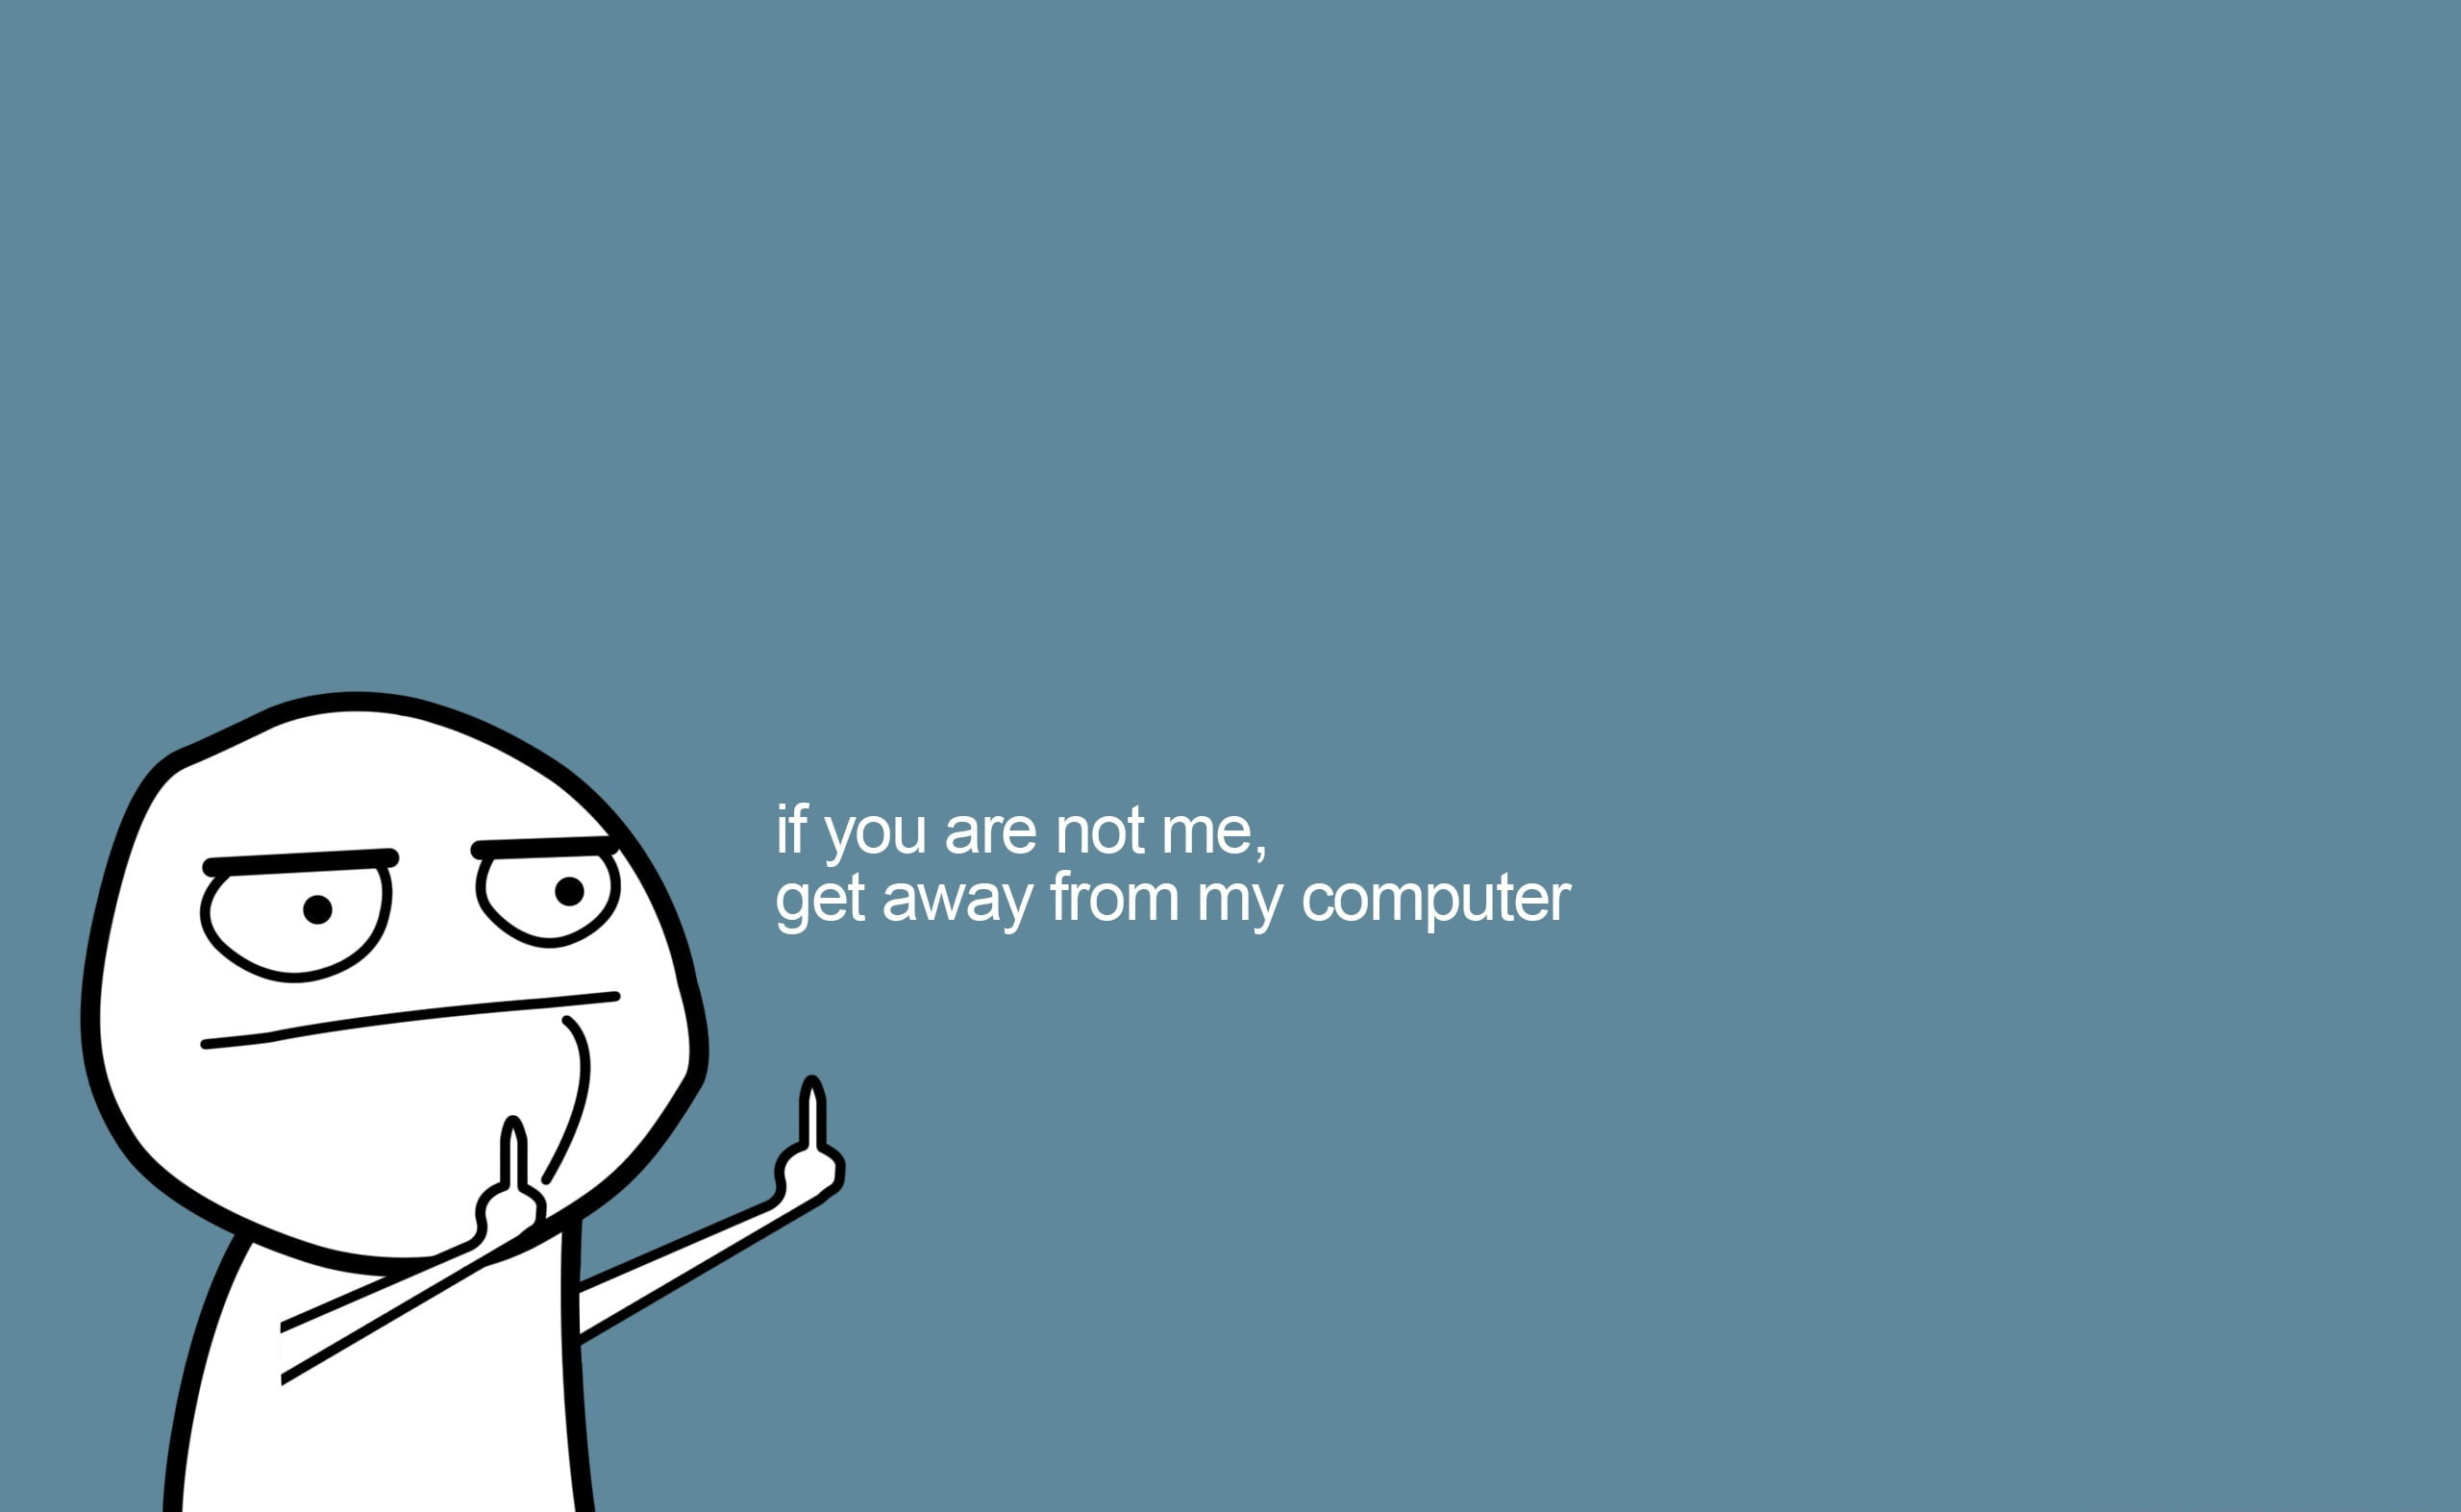 Get Away From My Computer, if you are not me, get away from my computer meme wallpaper